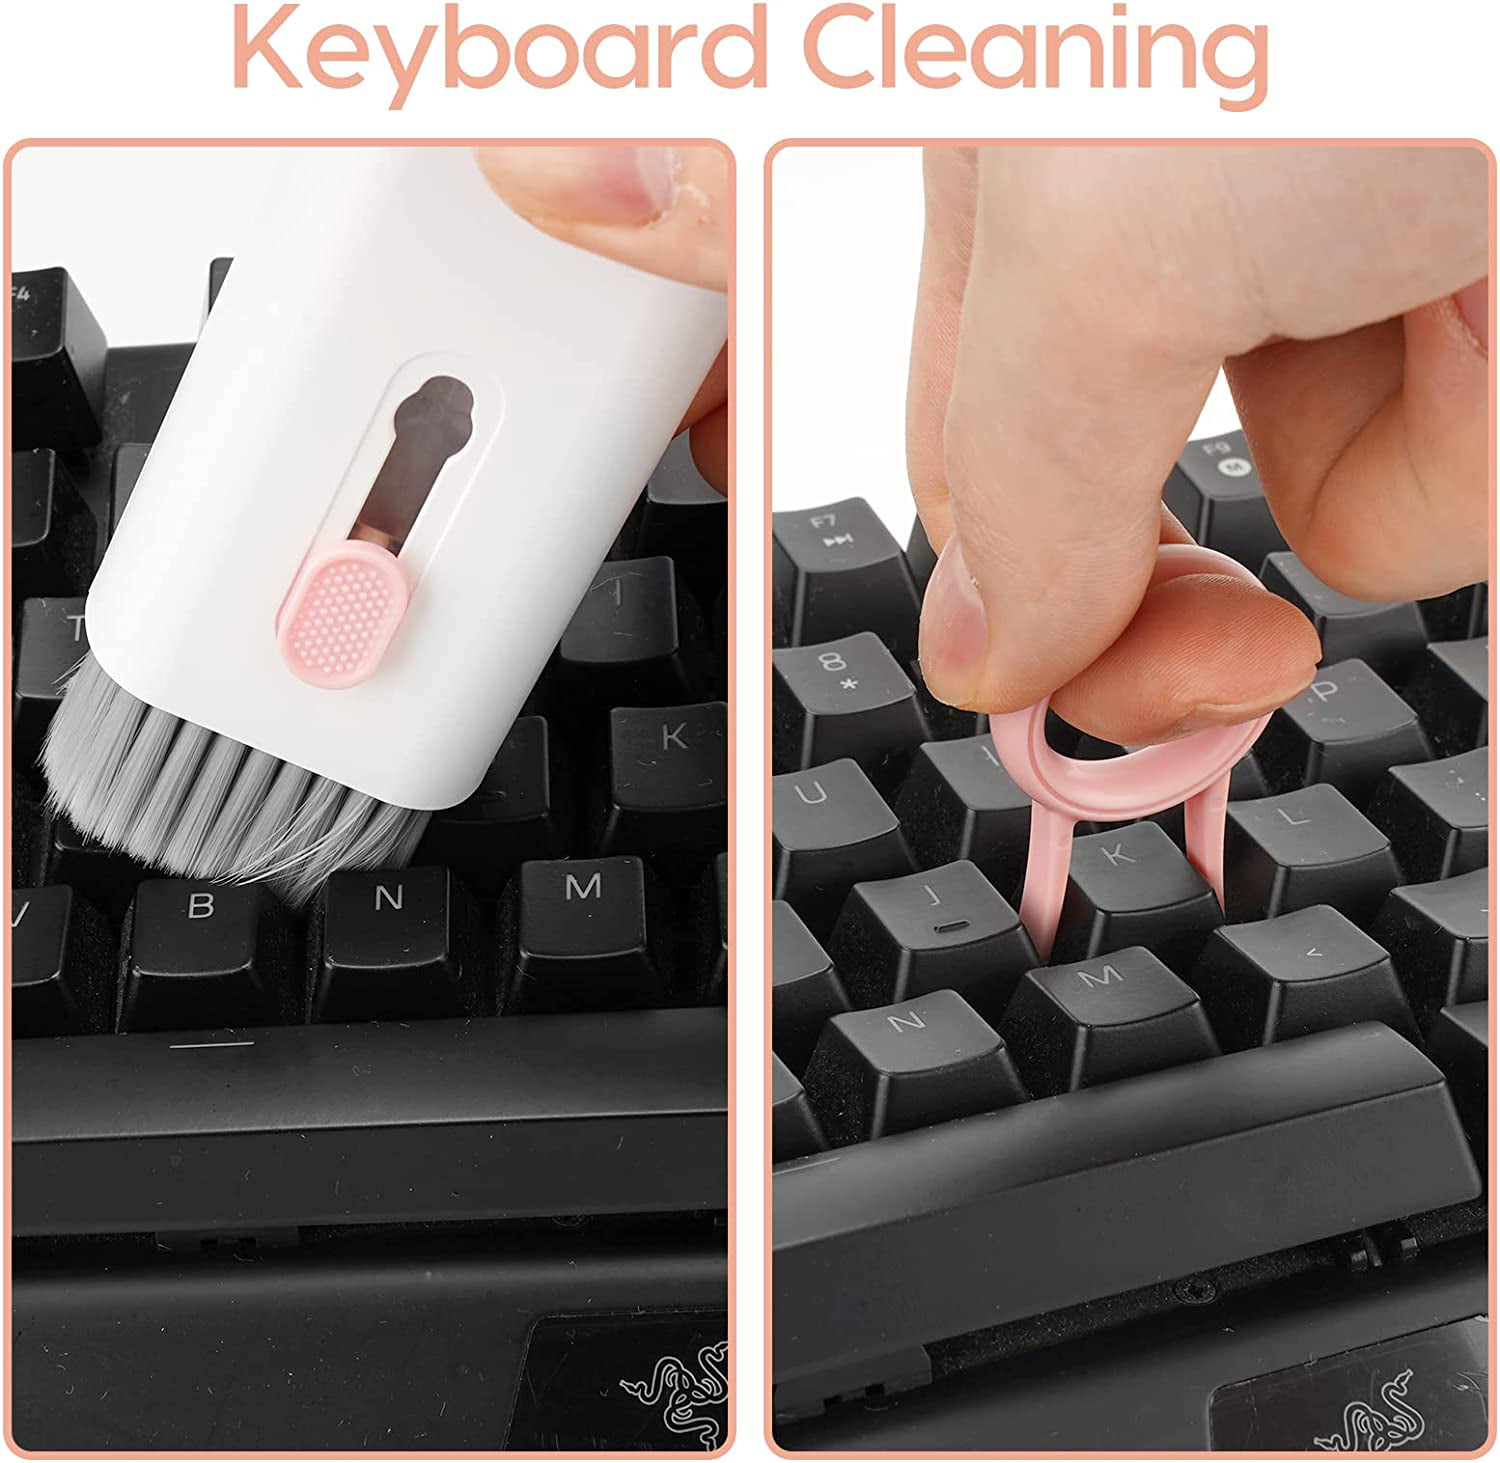 7-in-1 Electronic Cleaner Kit for Airpods Laptop Cleaner, Keyboard Cleaner  Kit, Portable Cleaning Kit with Cleaning Pen Brush for iPhone iPad MacBook  Screen/Keyboard/Headphones 